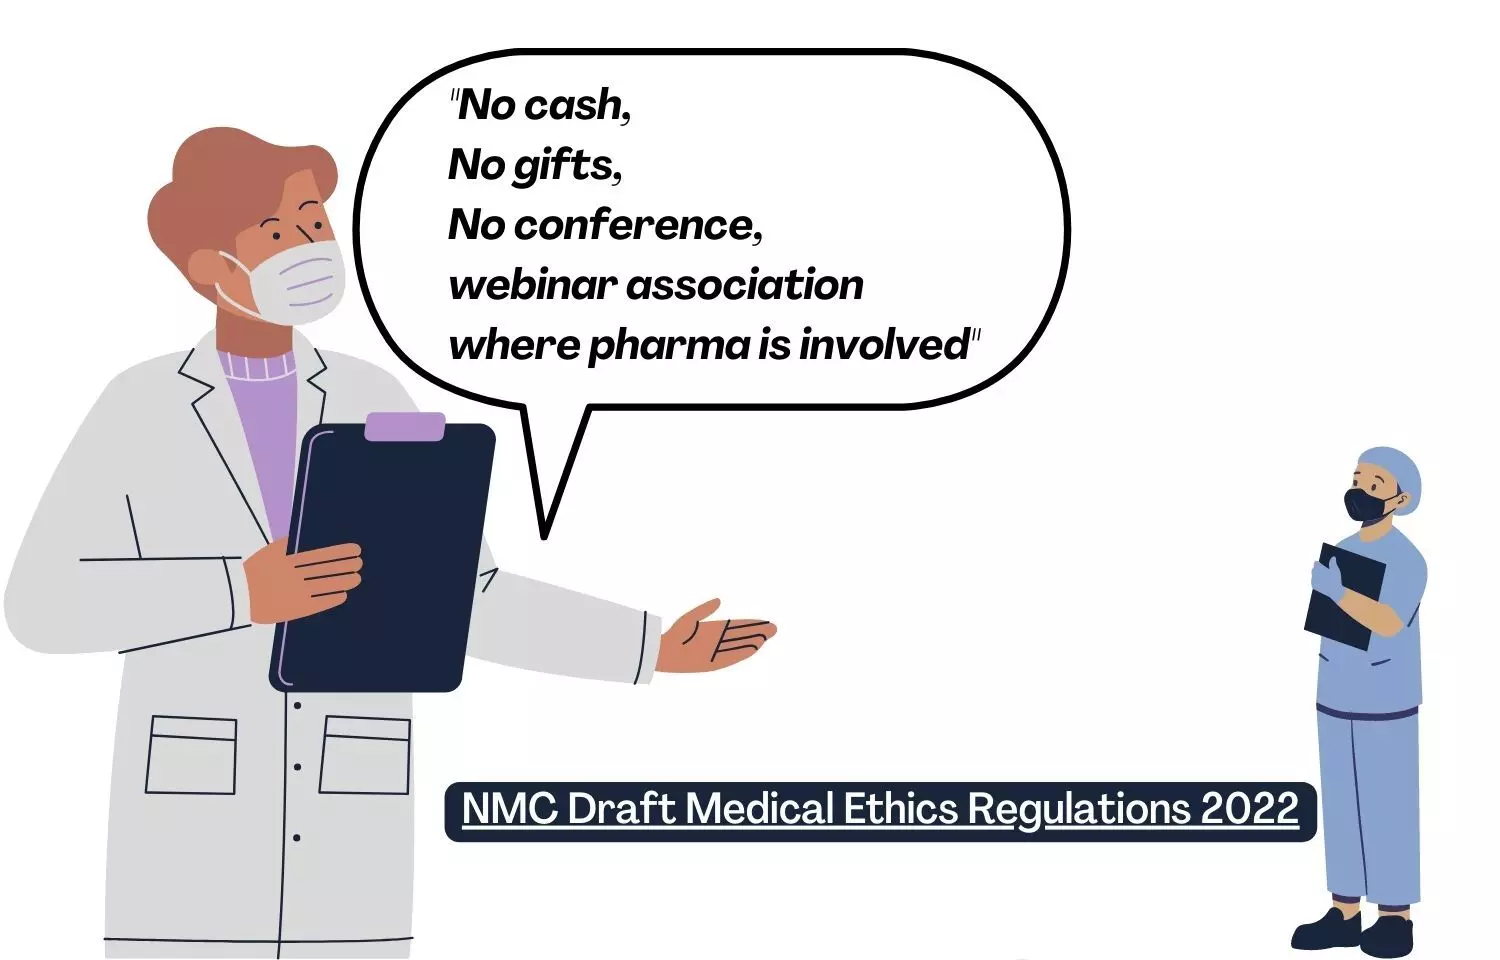 Doctors to Declare their earnings from Pharma in Affidavit, Violations to bring 3-month suspension: NMC draft Ethics Guidelines